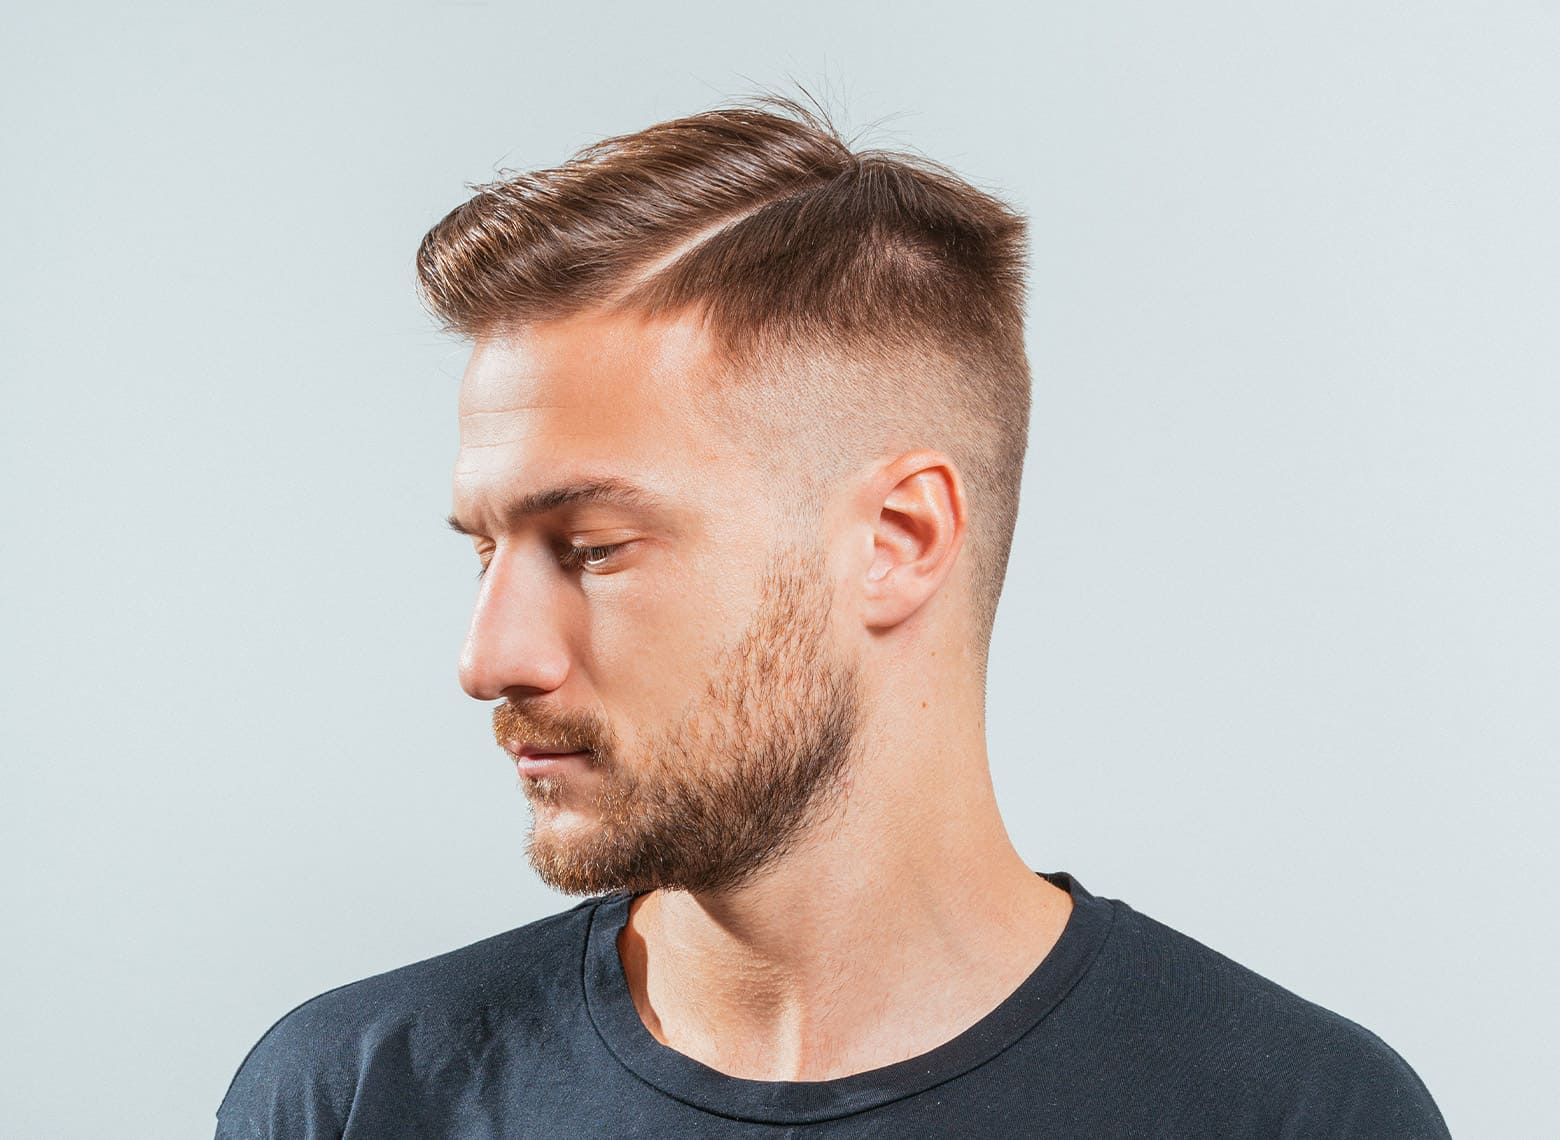 50 Best Comb Over Taper Haircuts for Men in 2022 (with Images)